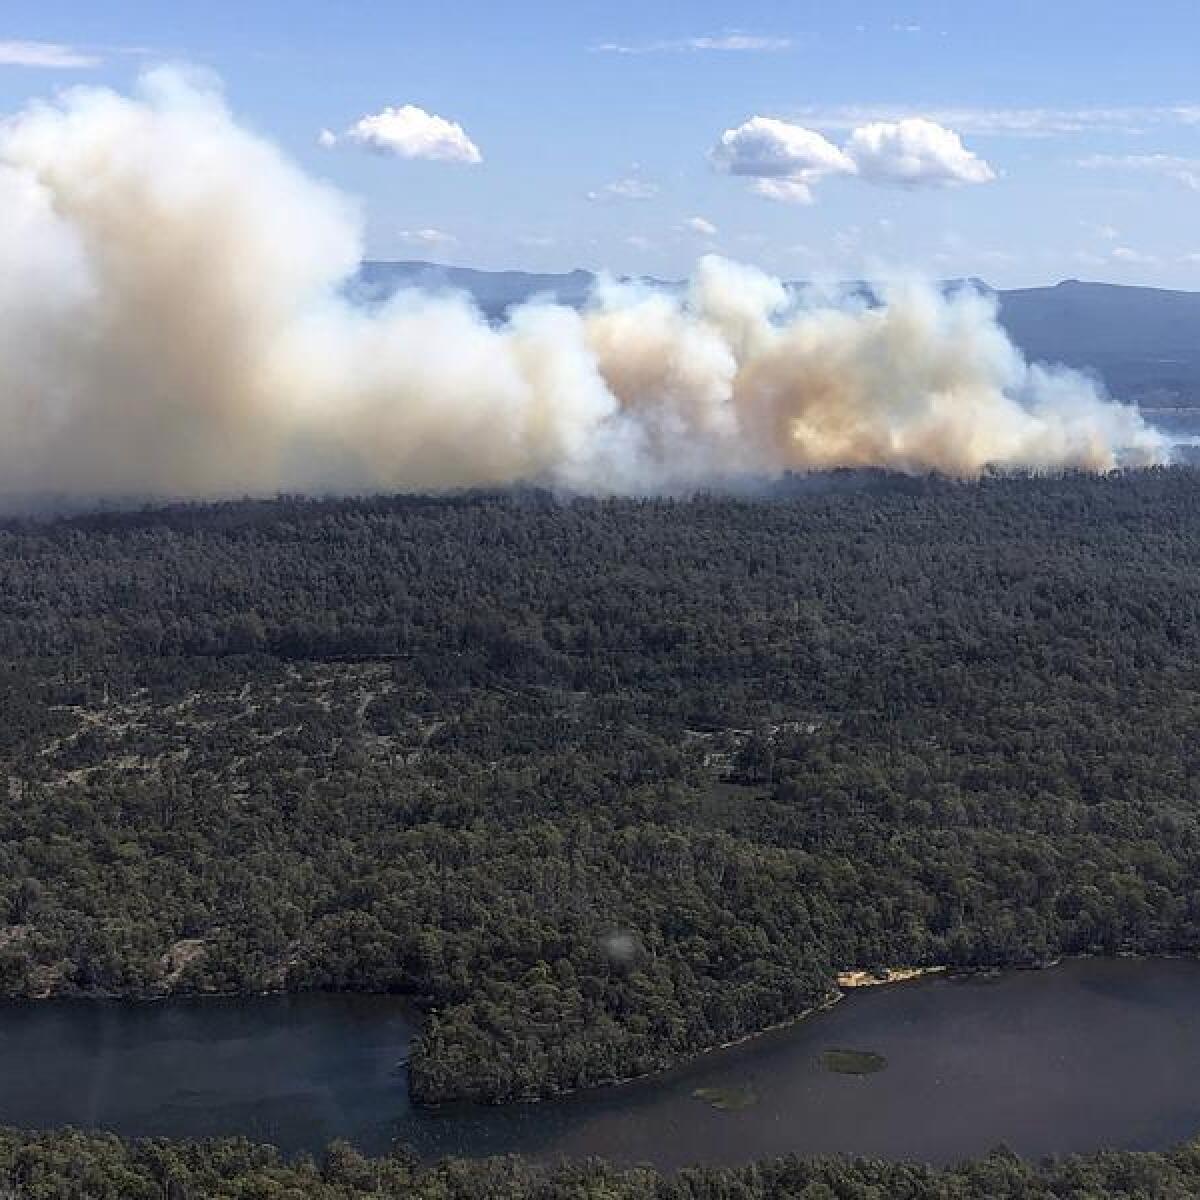 A supplied image shows a bushfire in Tasmania's Central Highlands